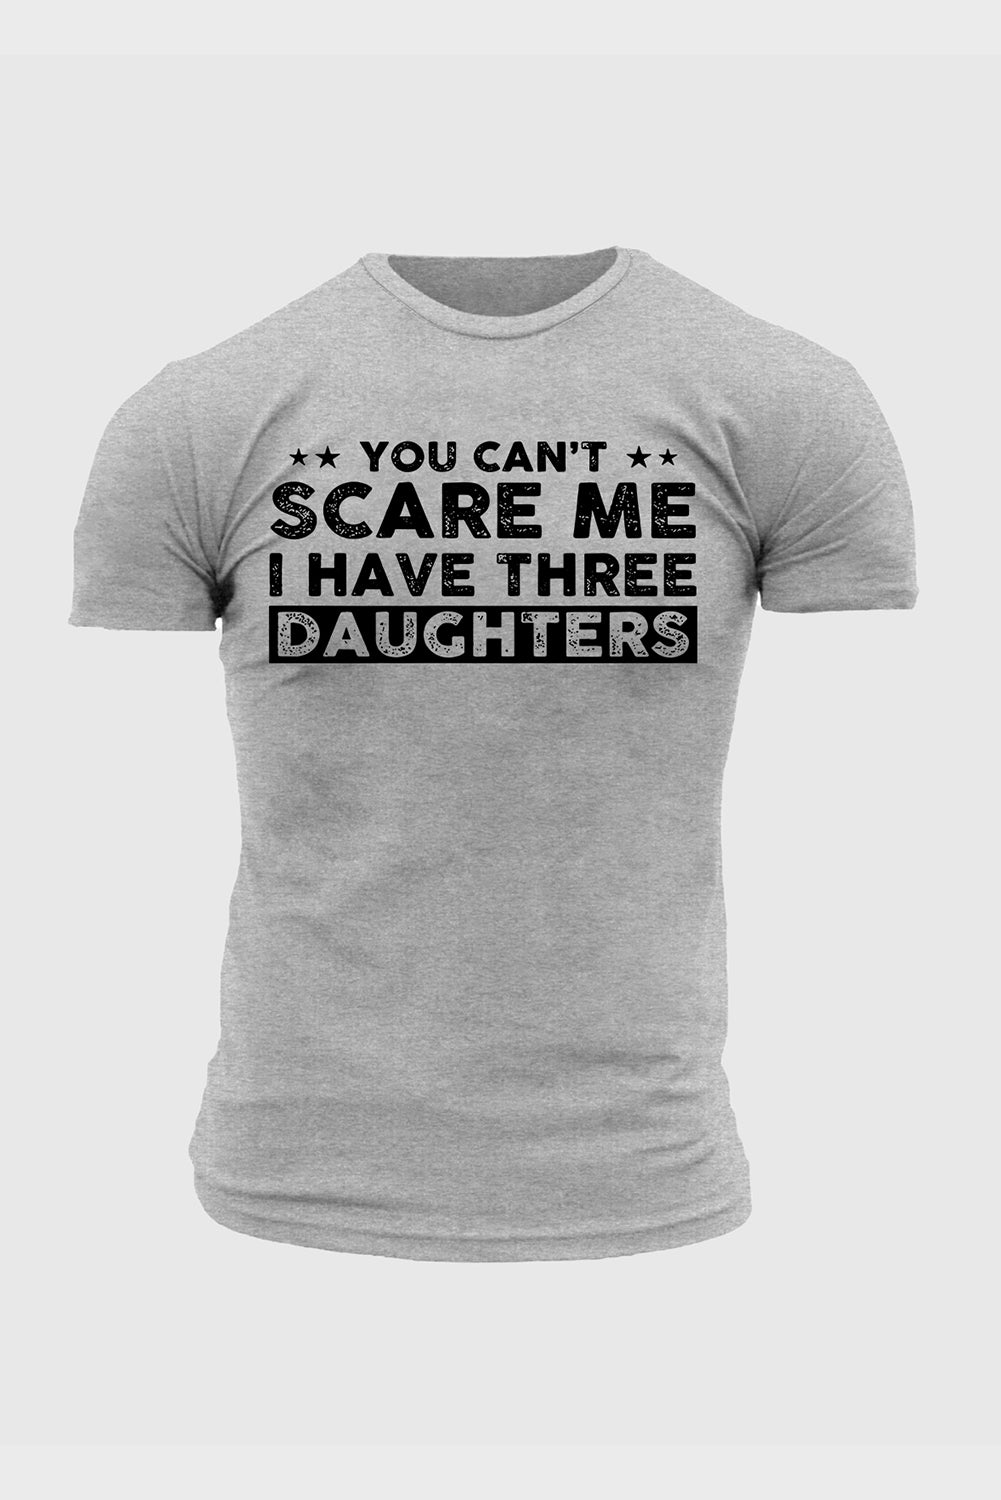 Gray You Can't Scare Me, I Have Three Daughters Men's Graphic Tee Gray 62%Polyester+32%Cotton+6%Elastane Men's Tops JT's Designer Fashion